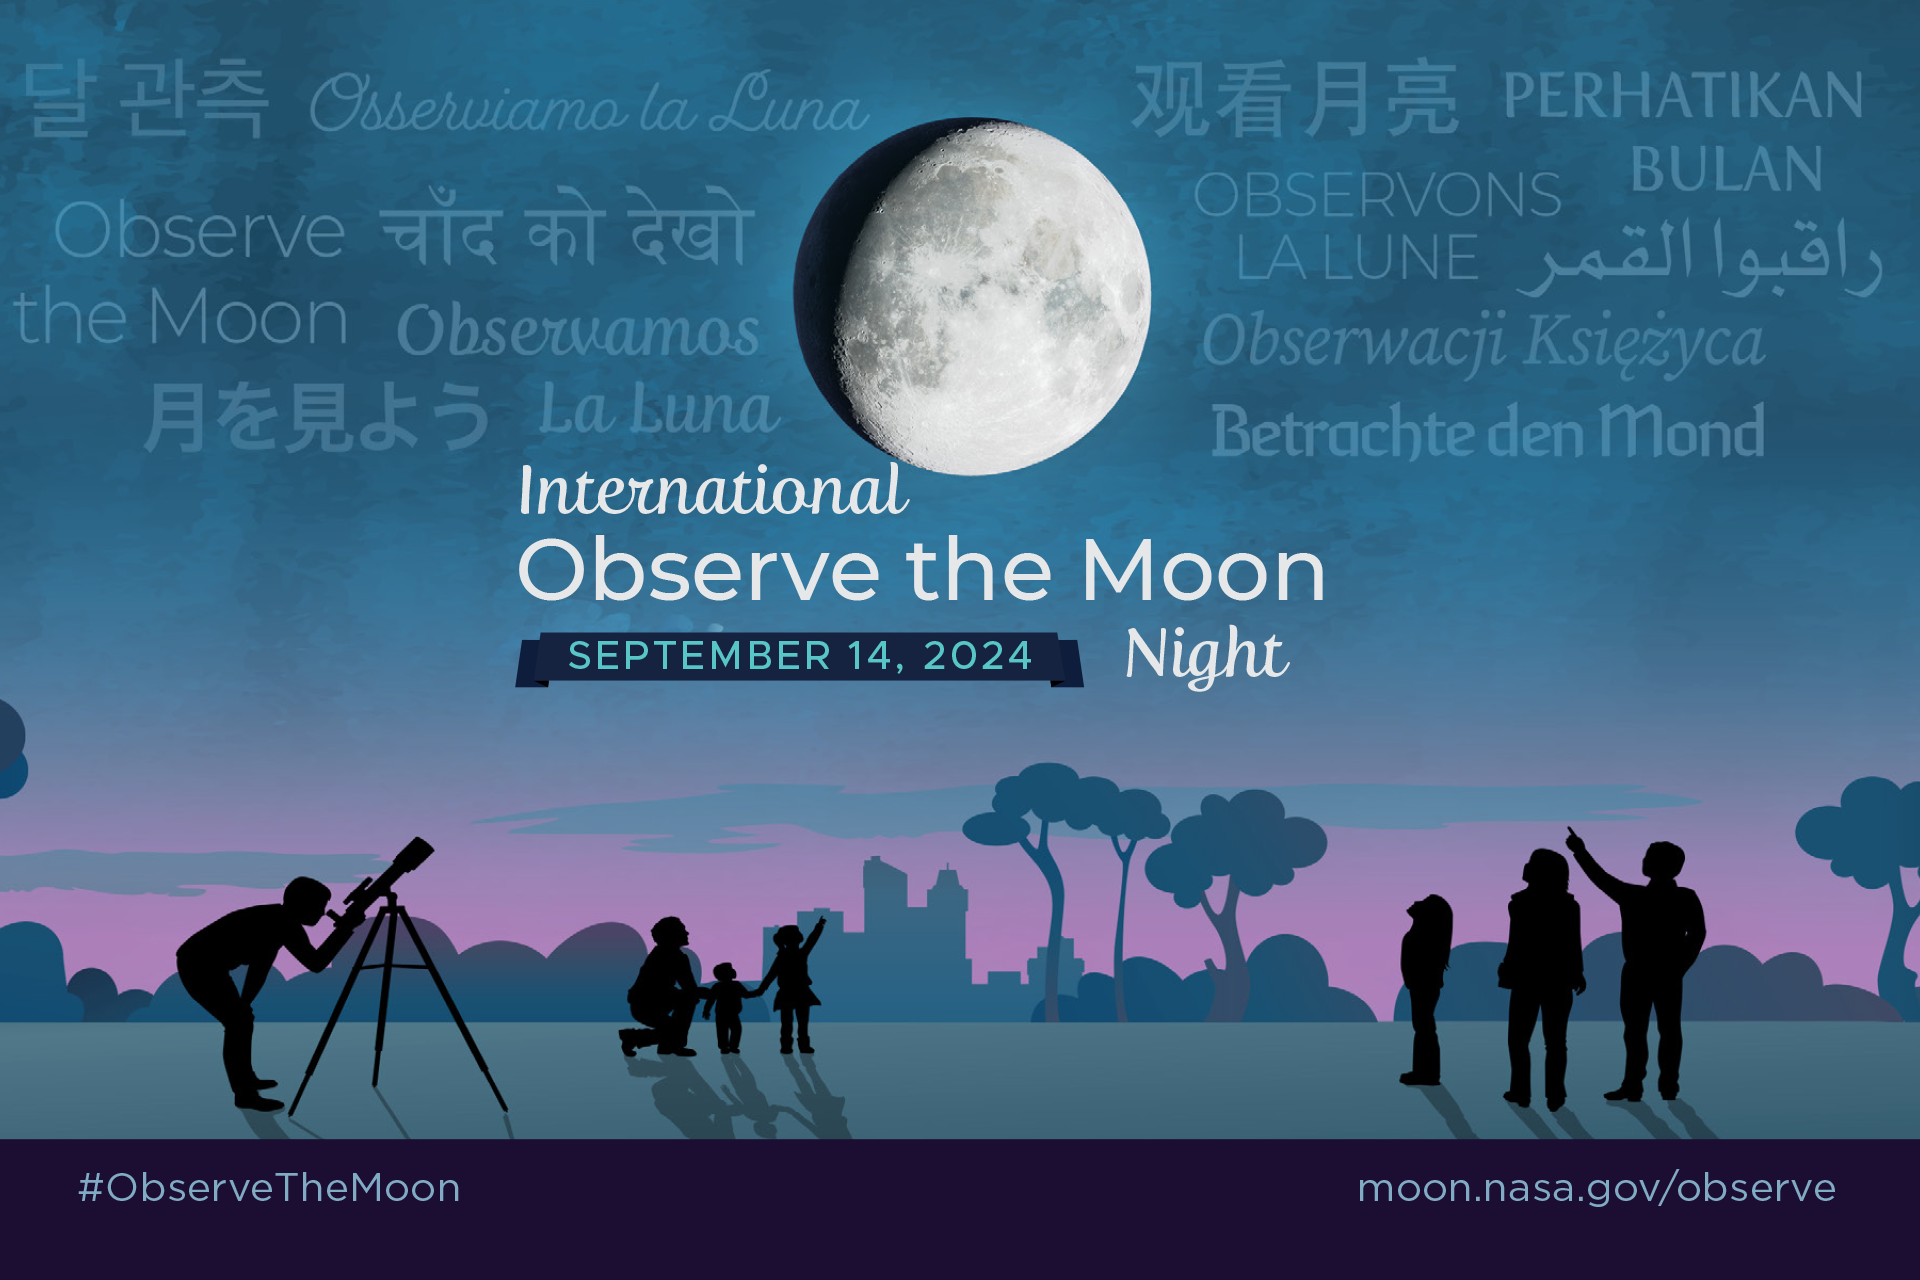 Stylized illustration of silhouettes of people looking up at a large Moon in the night sky, with the text International Observe the Moon Night September 14. The sky is faded with the title translated into different languages.